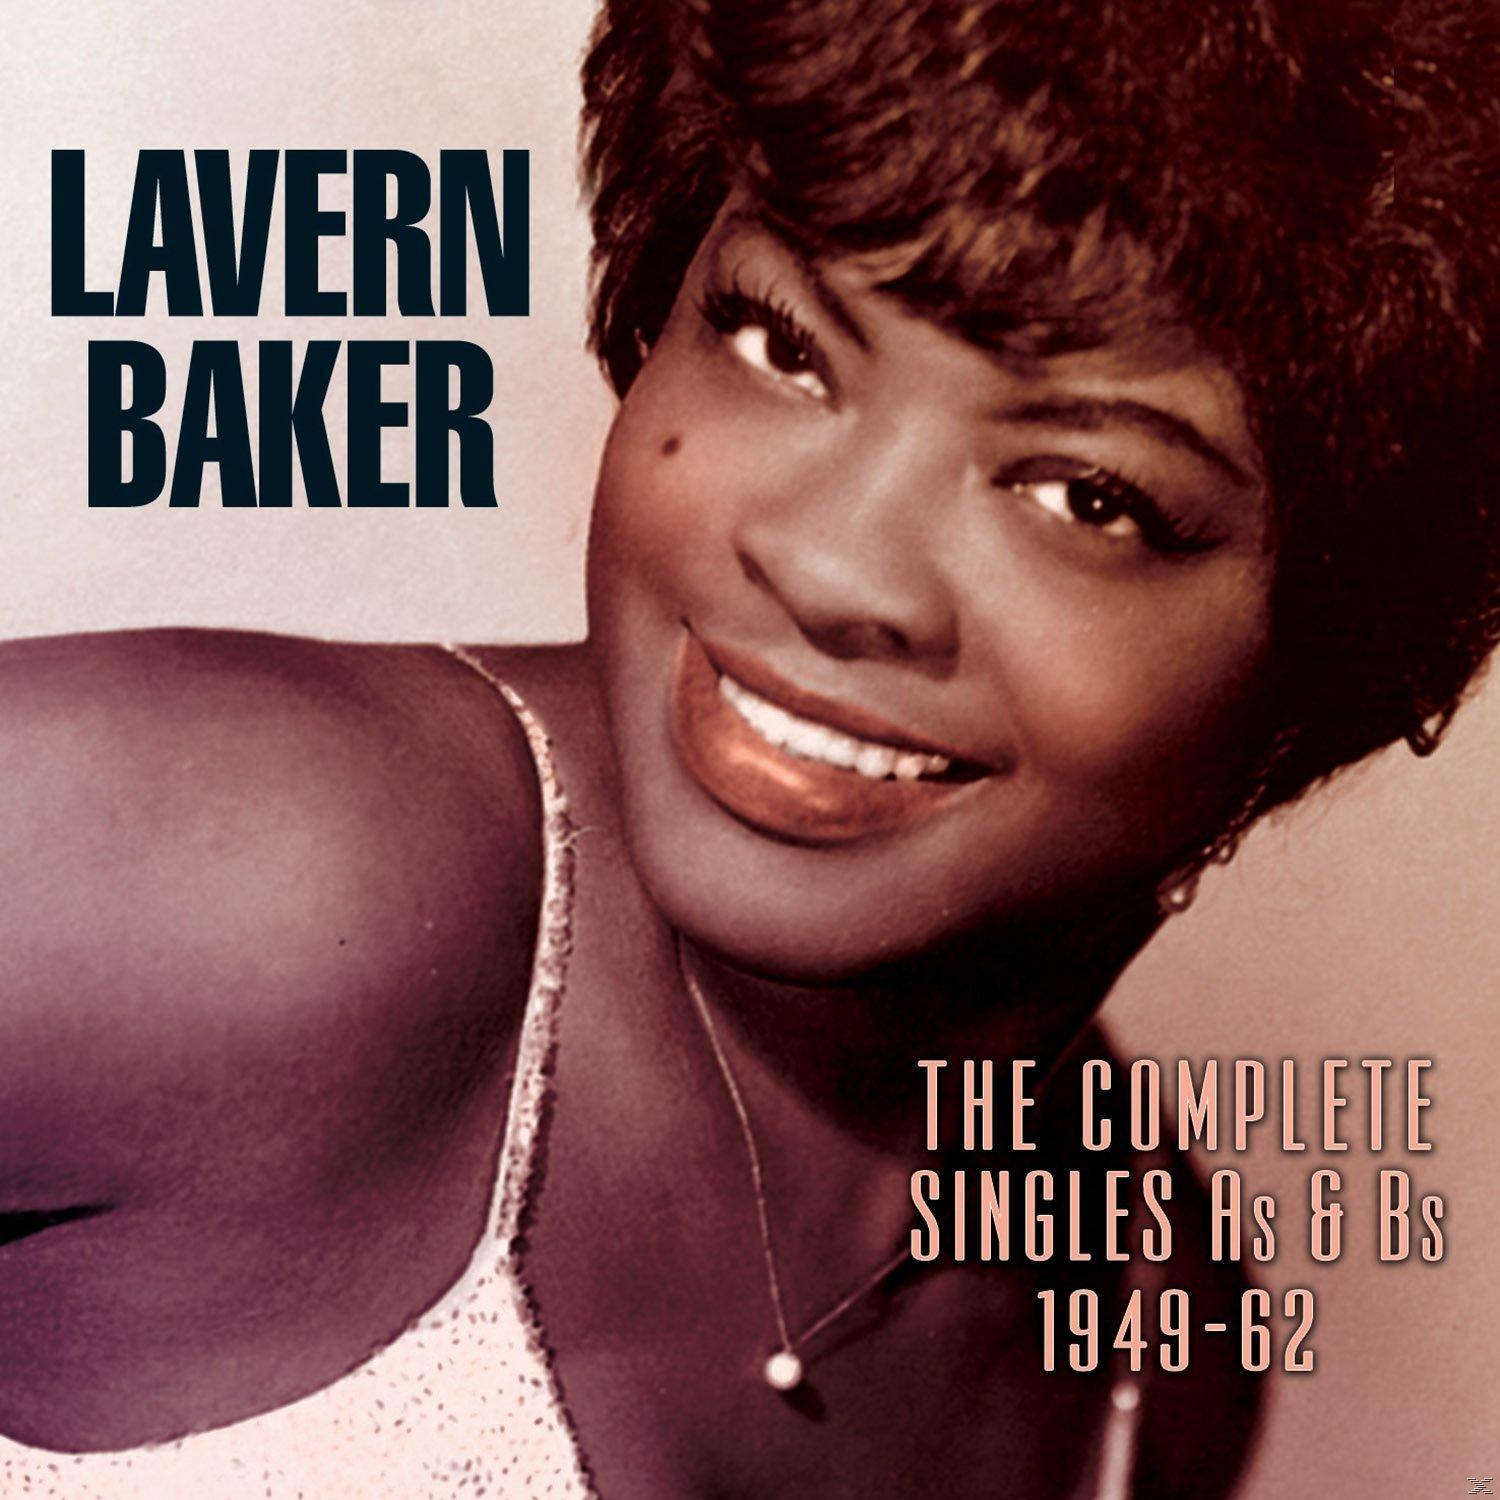 The Bs - Baker - & Complete 1949-62 (CD) LaVern Singles As